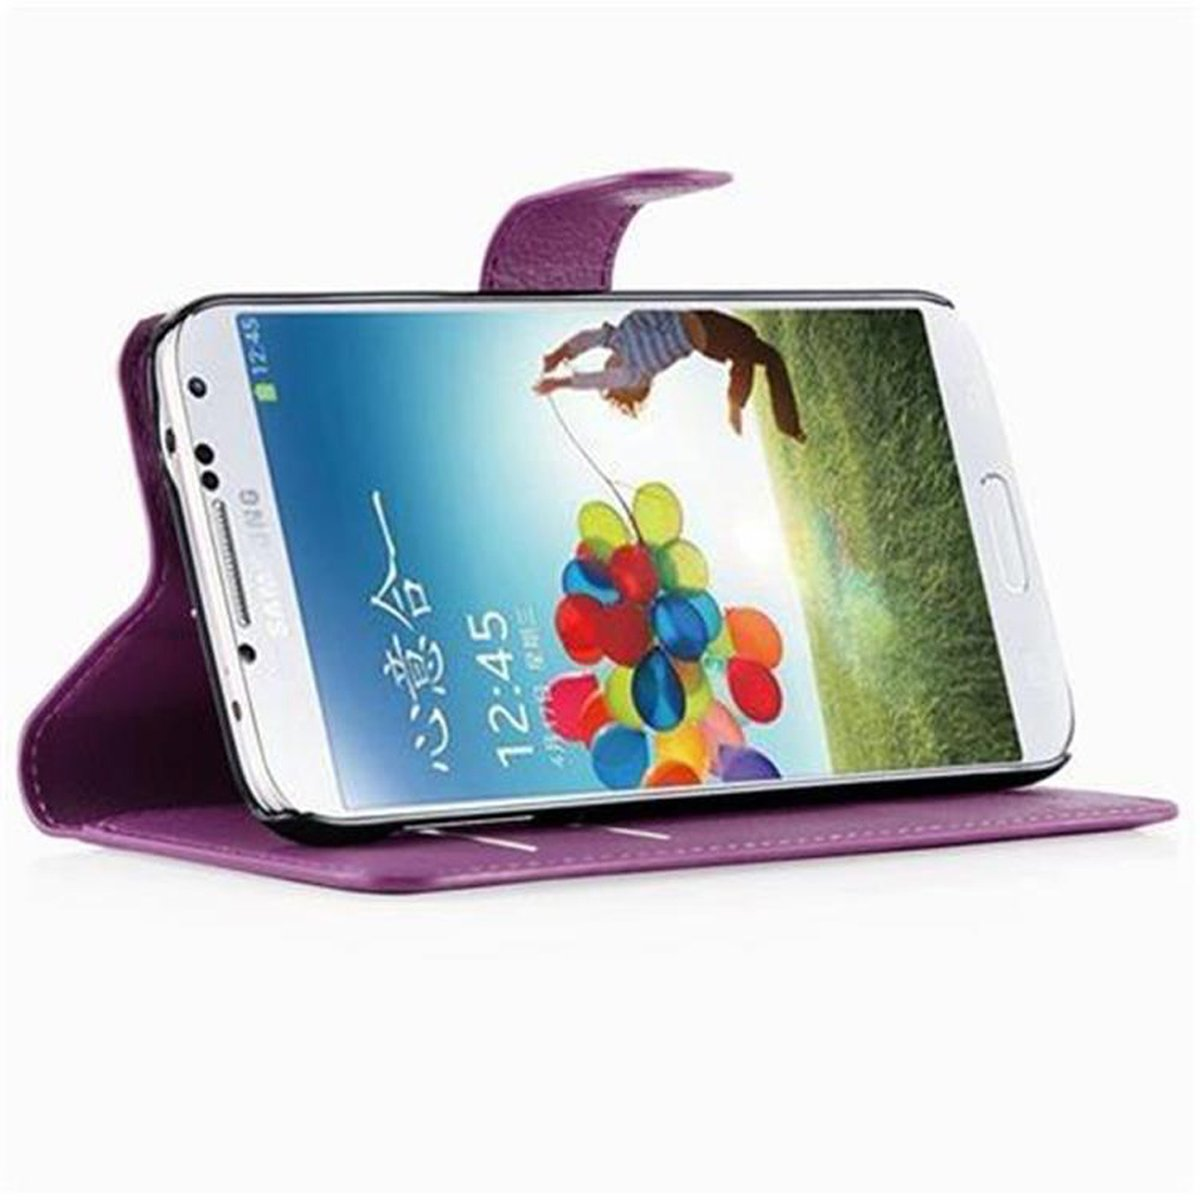 Hülle MANGAN / VIOLETT S5 S5 Bookcover, CADORABO Samsung, Book Standfunktion, Galaxy NEO,